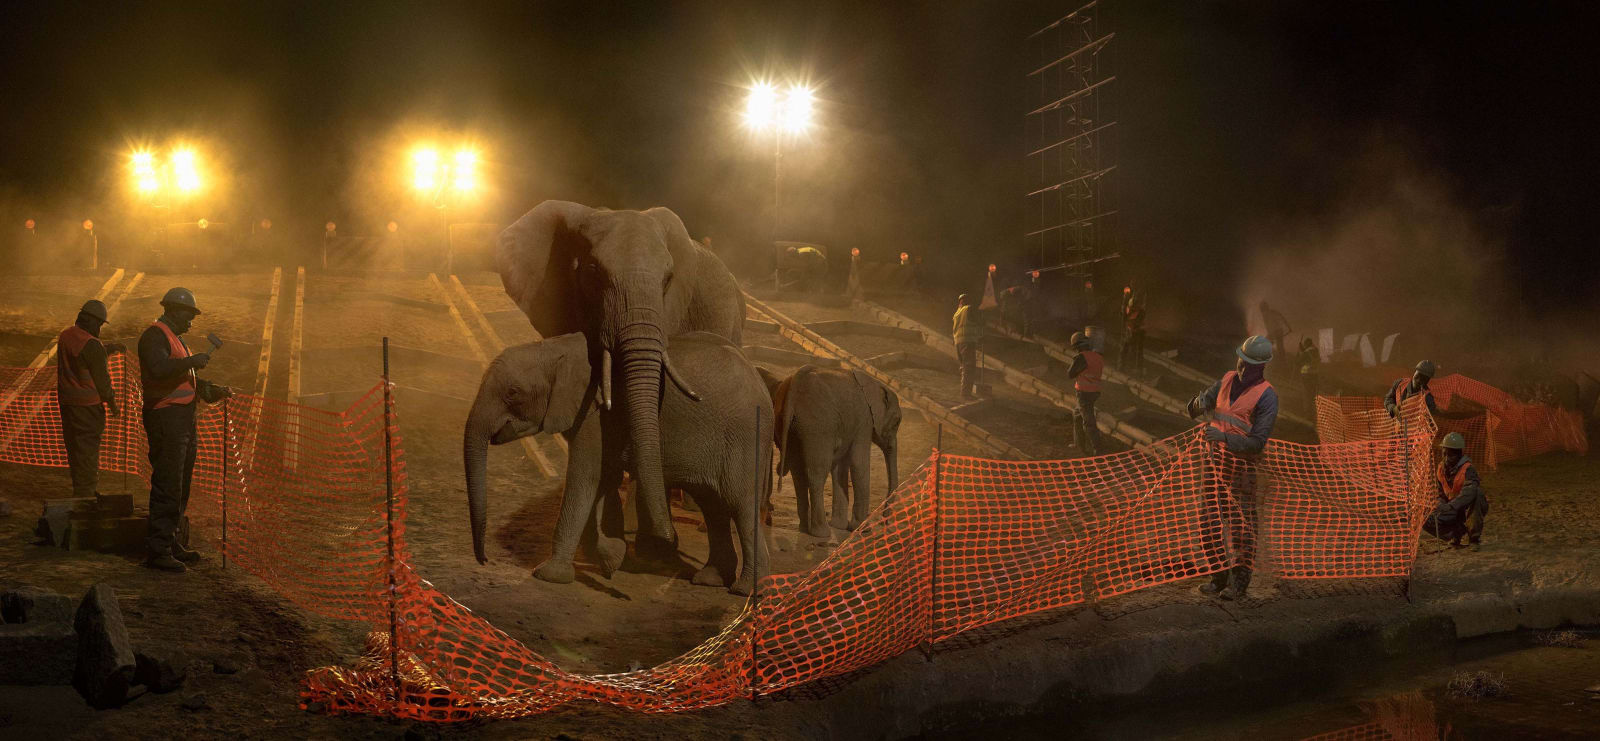 Nick Brandt, Highway Construction With Elephants, Workers & Fence, 2018